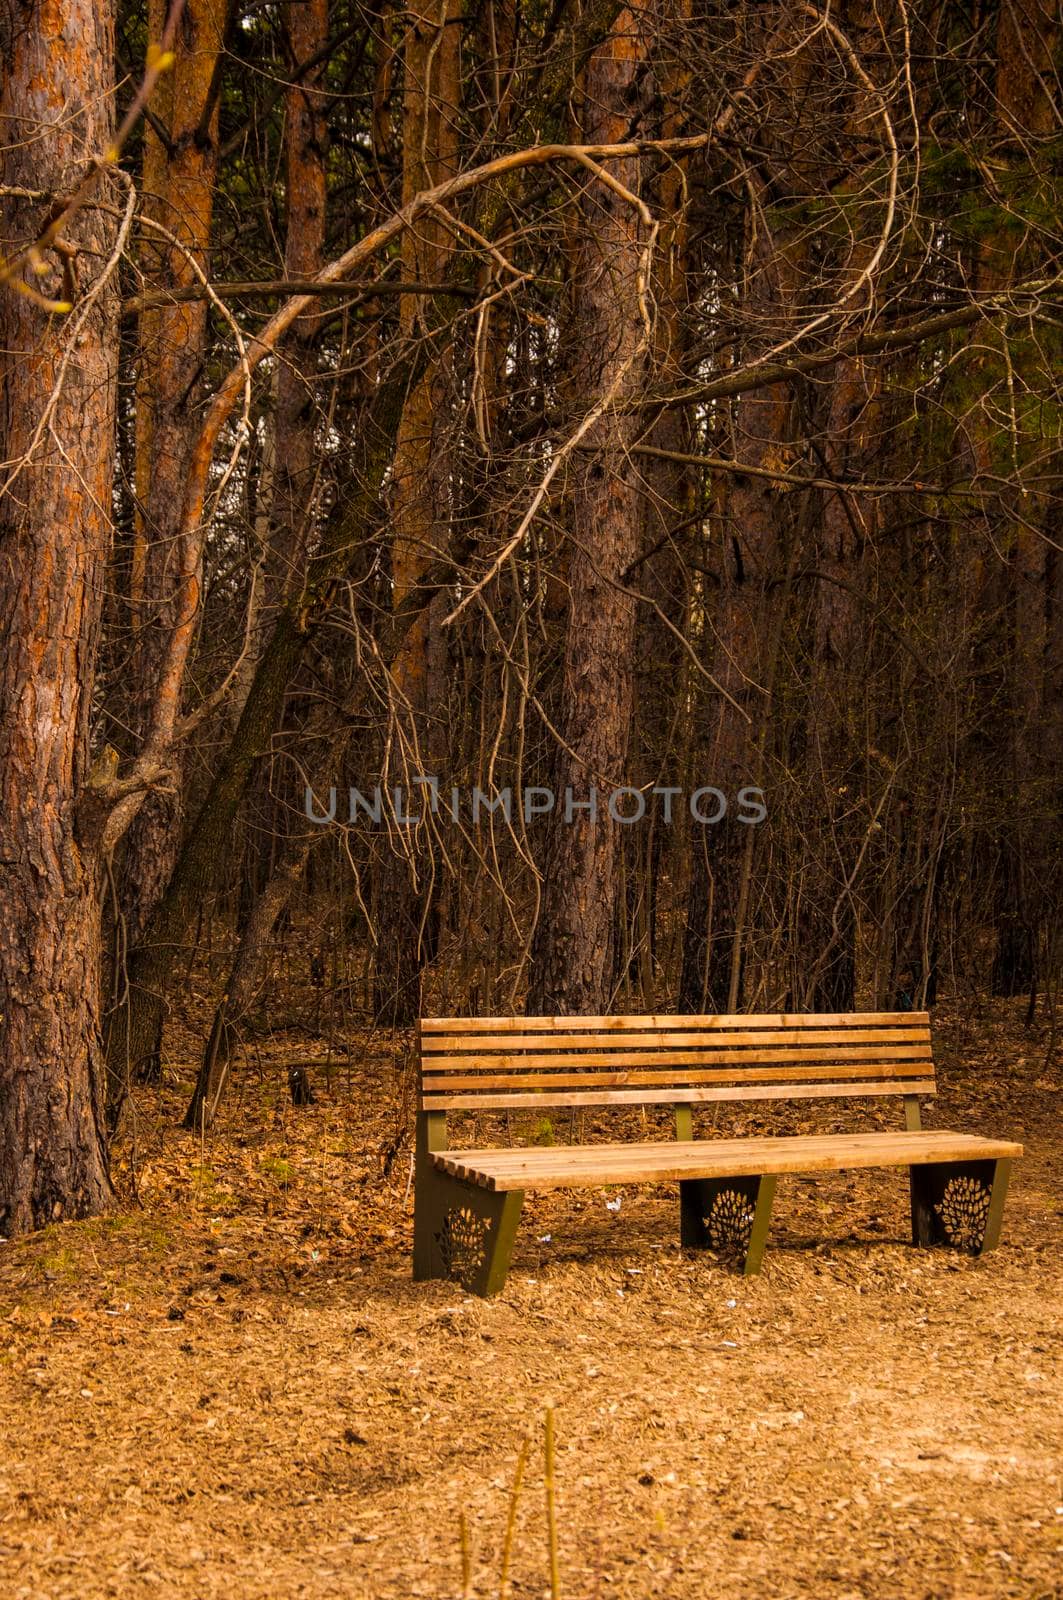 Bench in the park among the trees